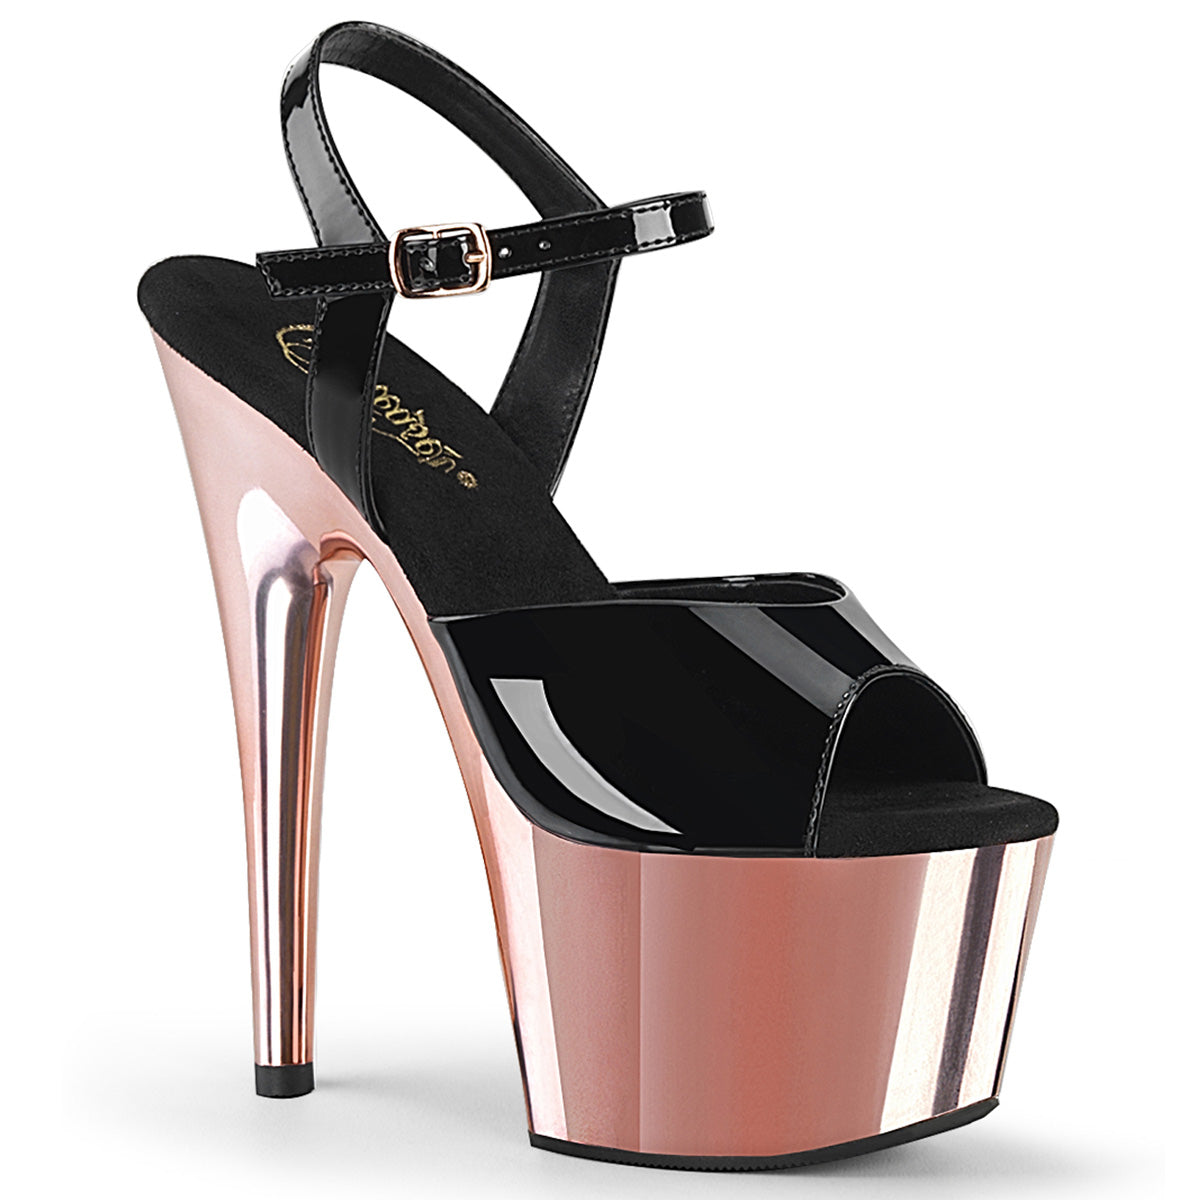 ADORE-709 7" Heel Black Rose Gold Chrome Strippers Shoes